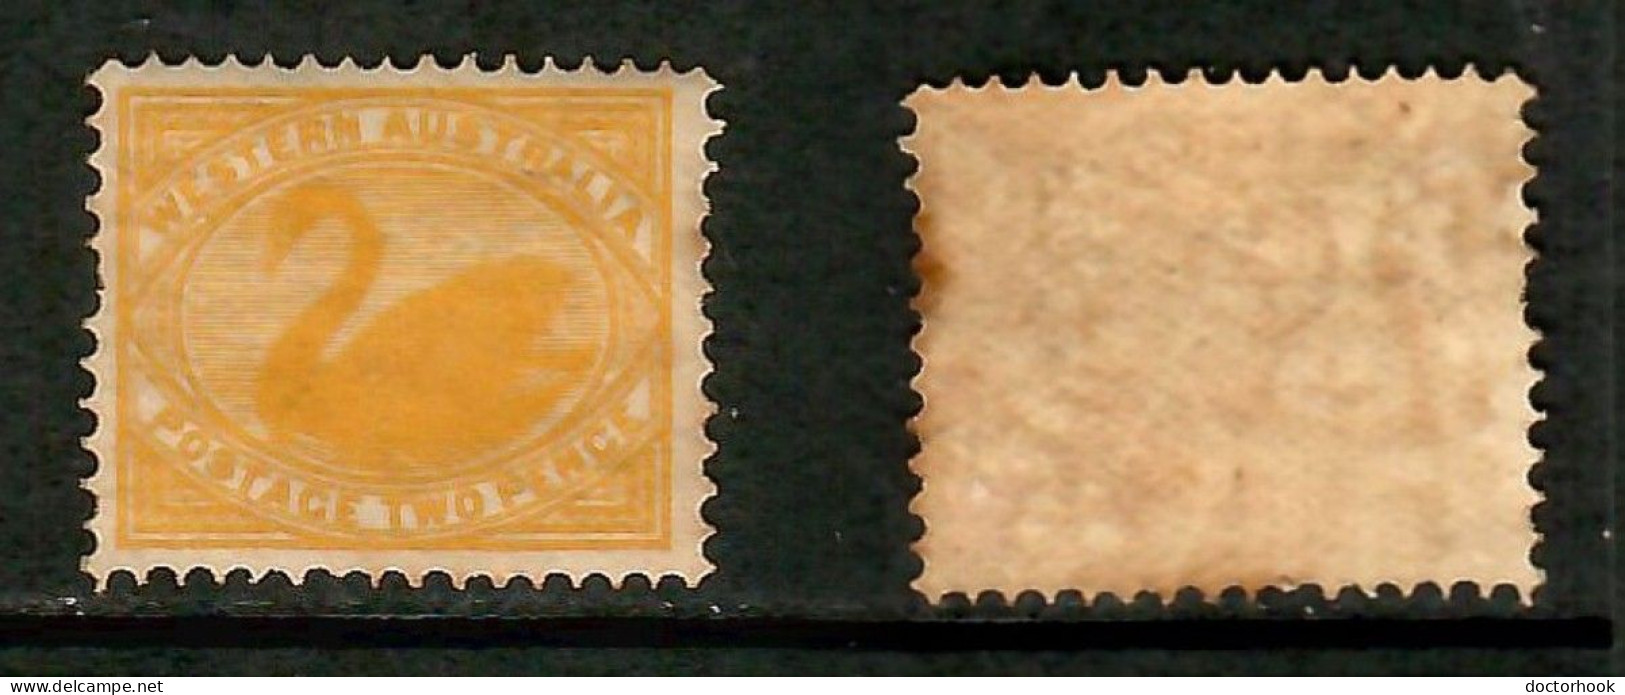 WESTERN AUSTRALIA   Scott # 77* MINT LH (1 Short Perf On Left Side) (CONDITION AS PER SCAN) (Stamp Scan # 1009-8) - Nuevos